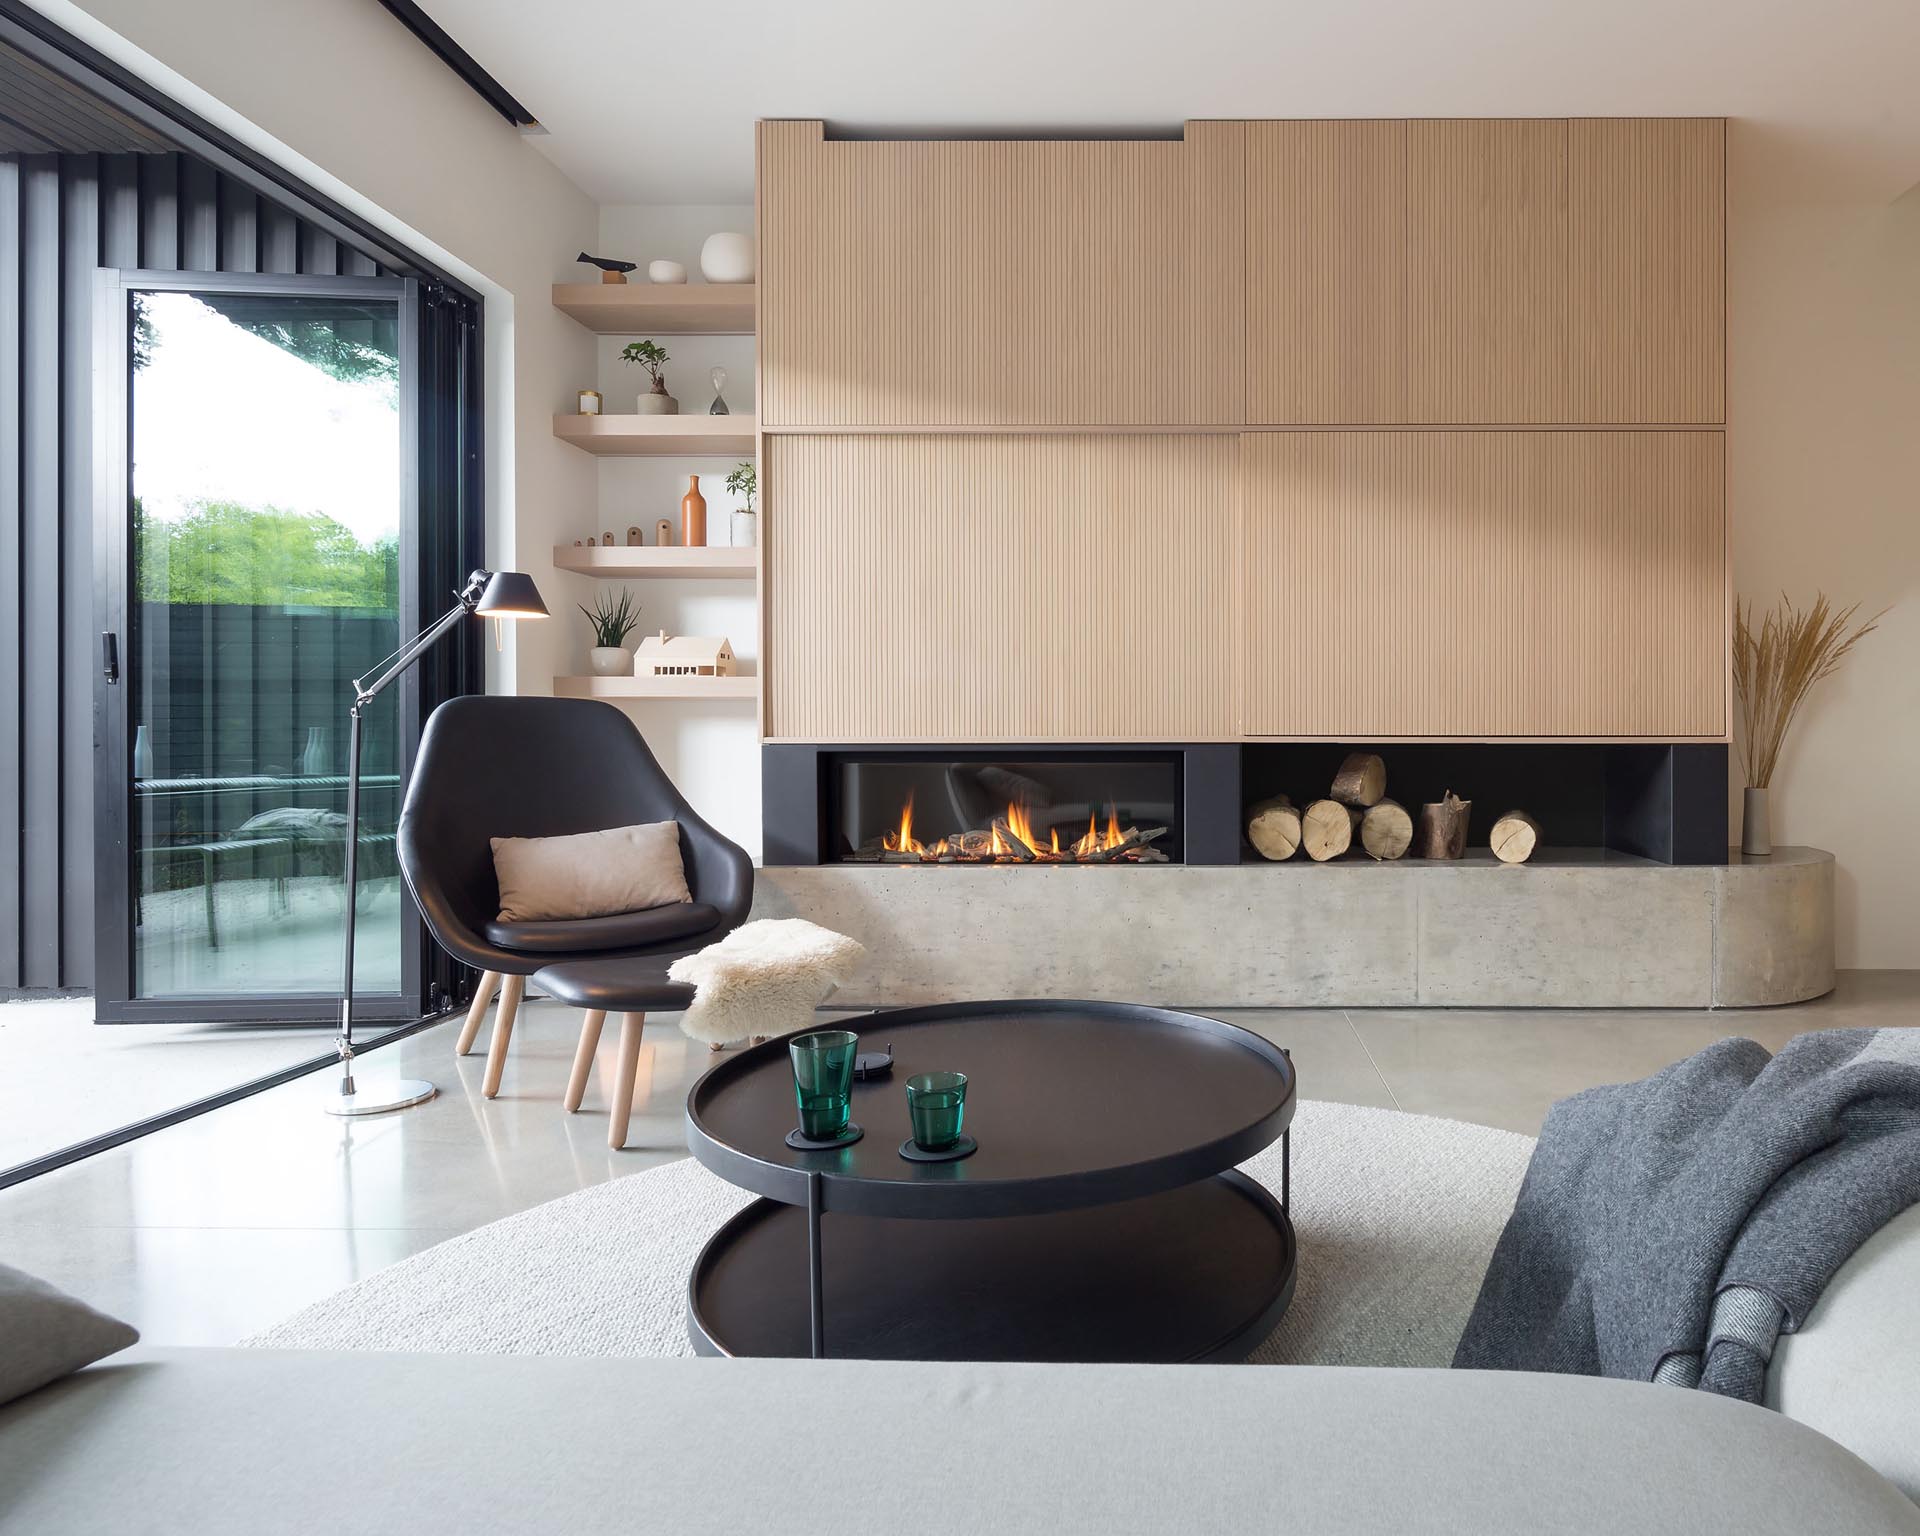 This modern living room has a gas fireplace with concrete base and a hidden TV cabinet built-in above.